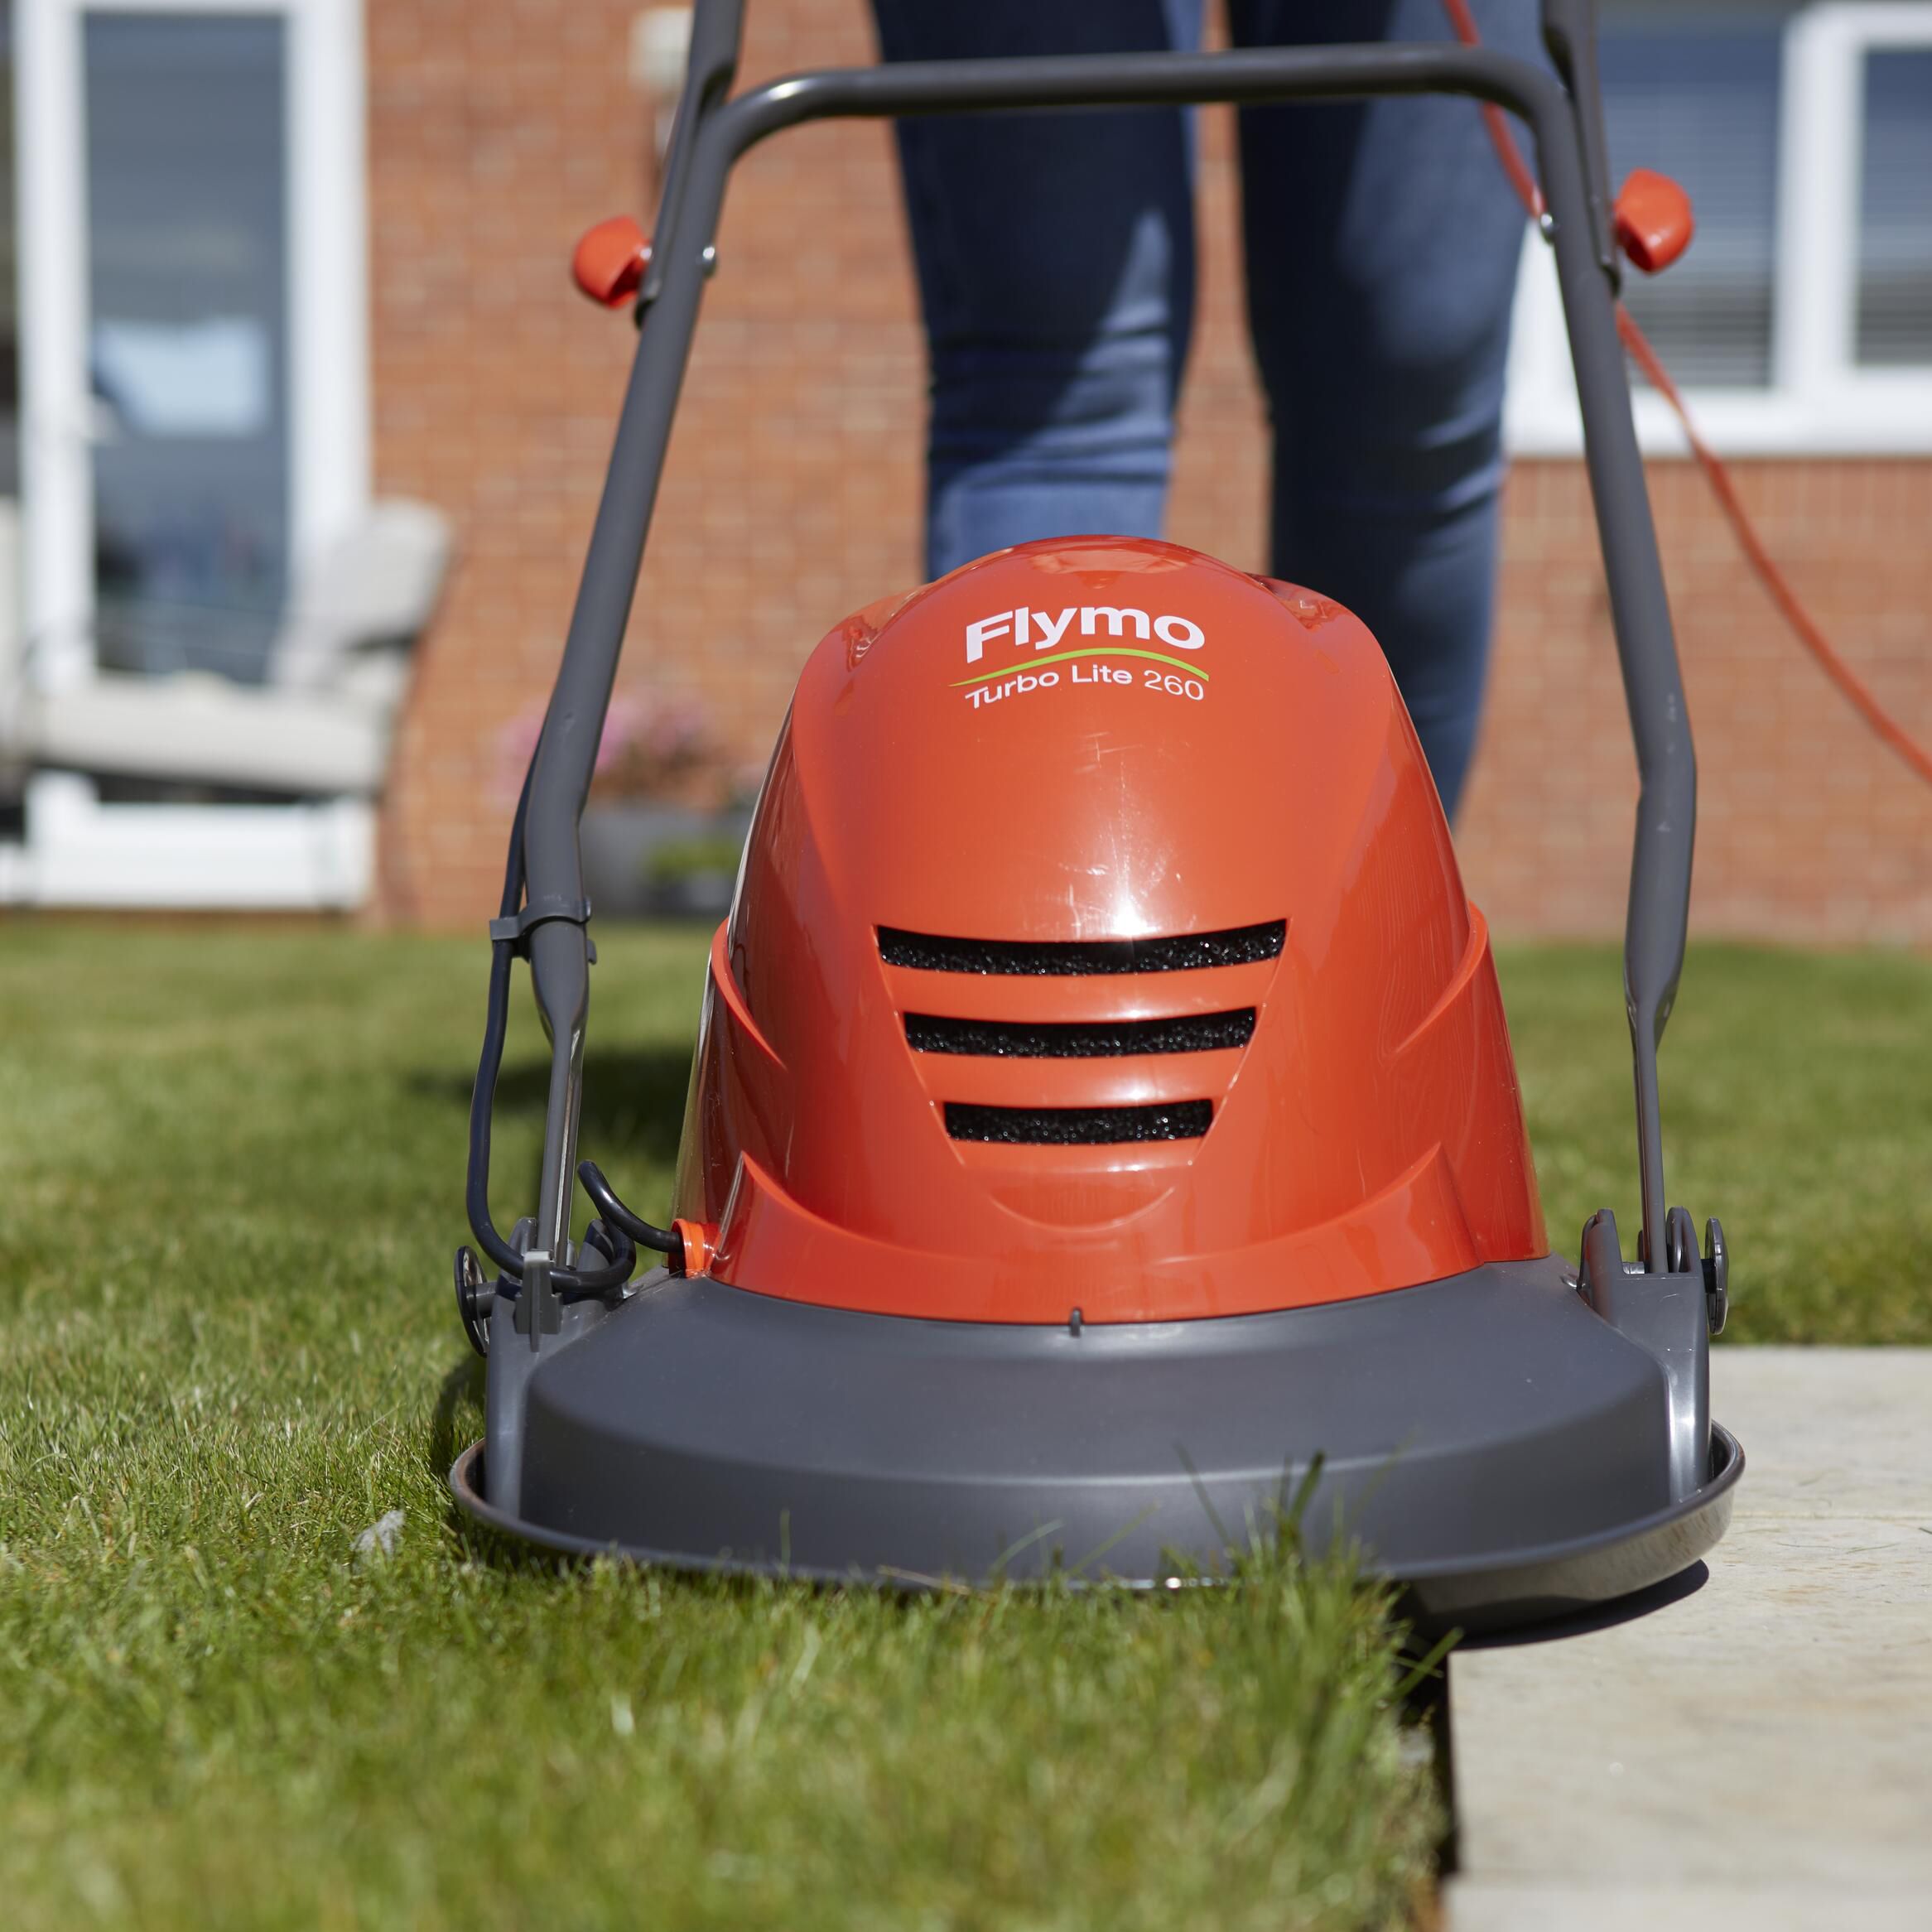 Flymo Turbo Lite 260 Corded Hover Lawnmower